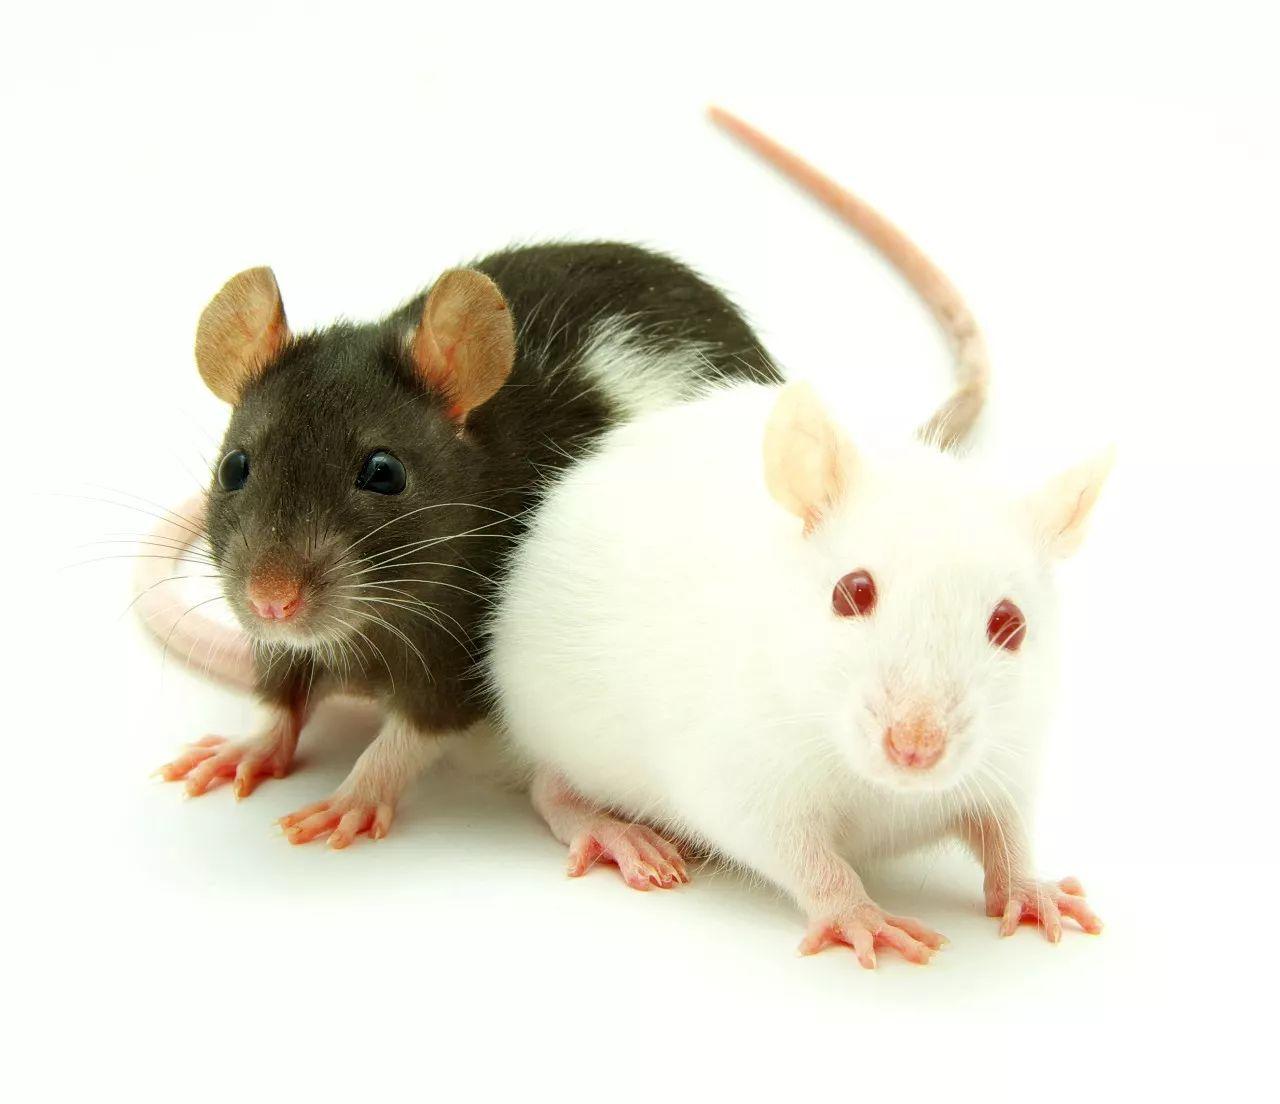 Retracted Roundup-fed rat research republished | Grist